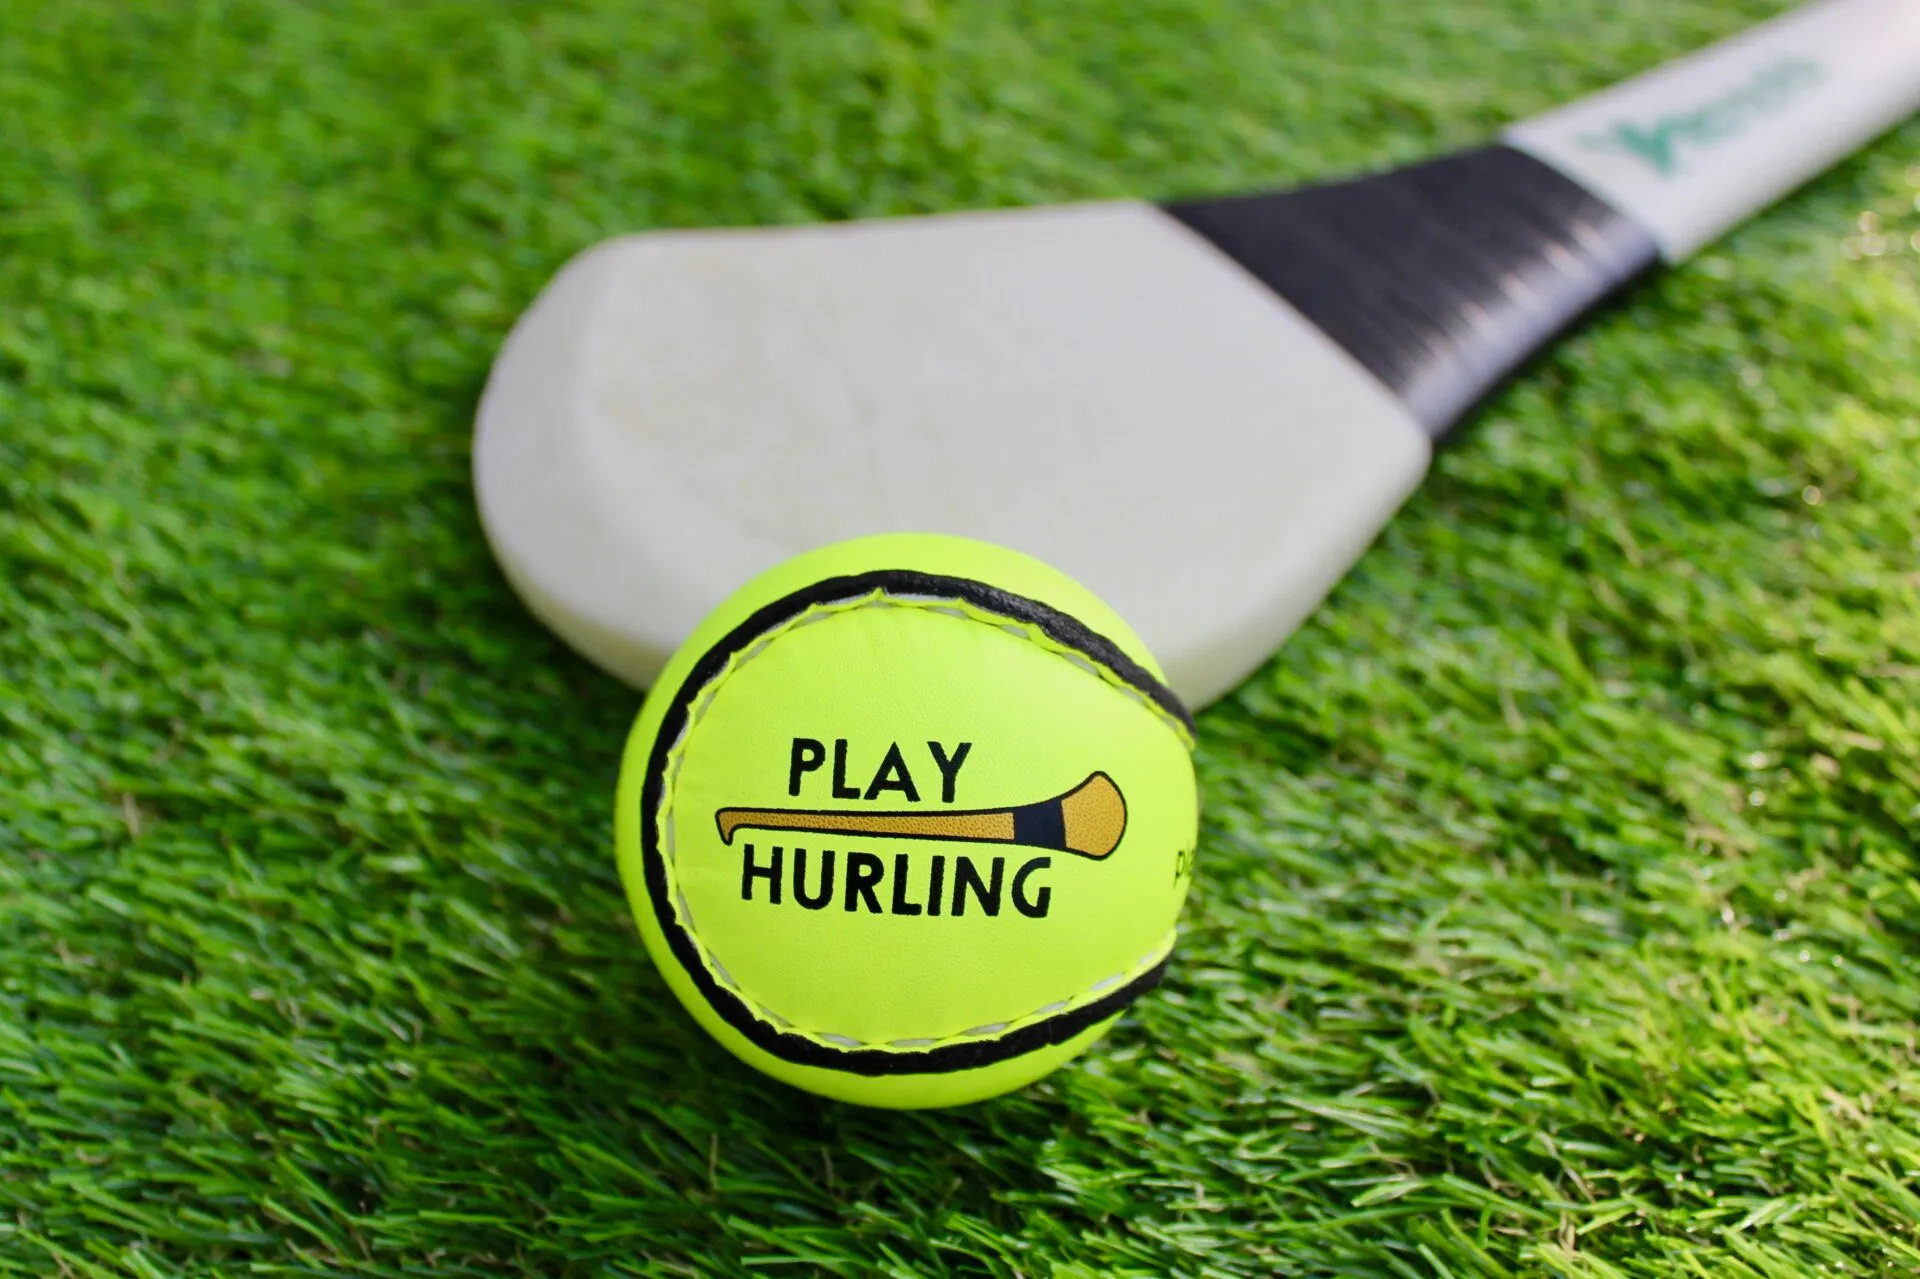 Hurling: A hurley - a wooden stick used in Irish sports, A sliotar - a small ball. 1920x1280 HD Wallpaper.